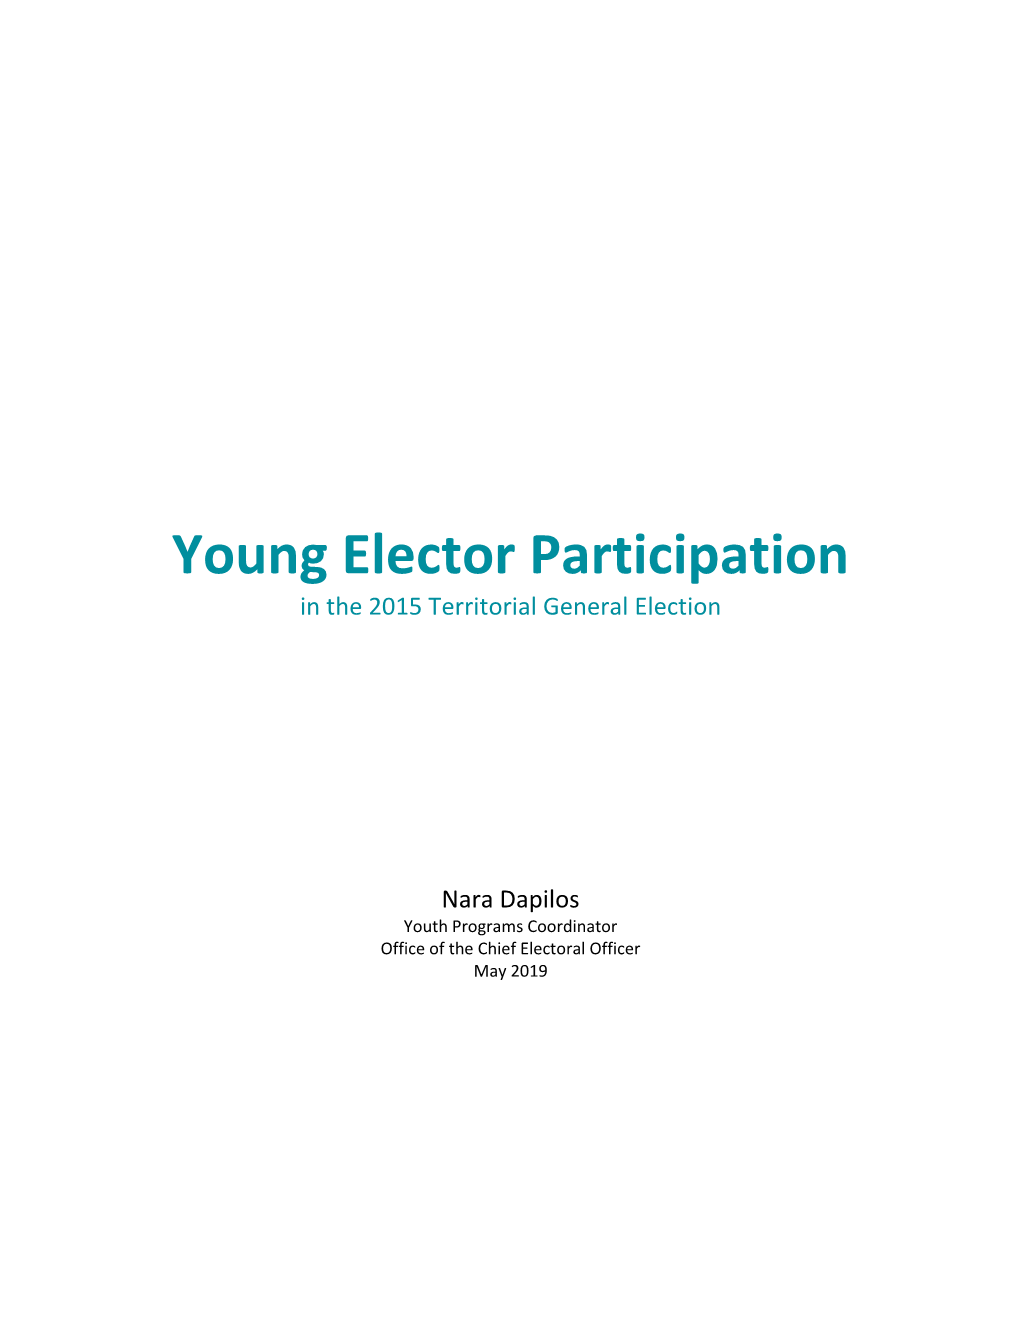 Young Elector Participation in the 2015 Territorial General Election